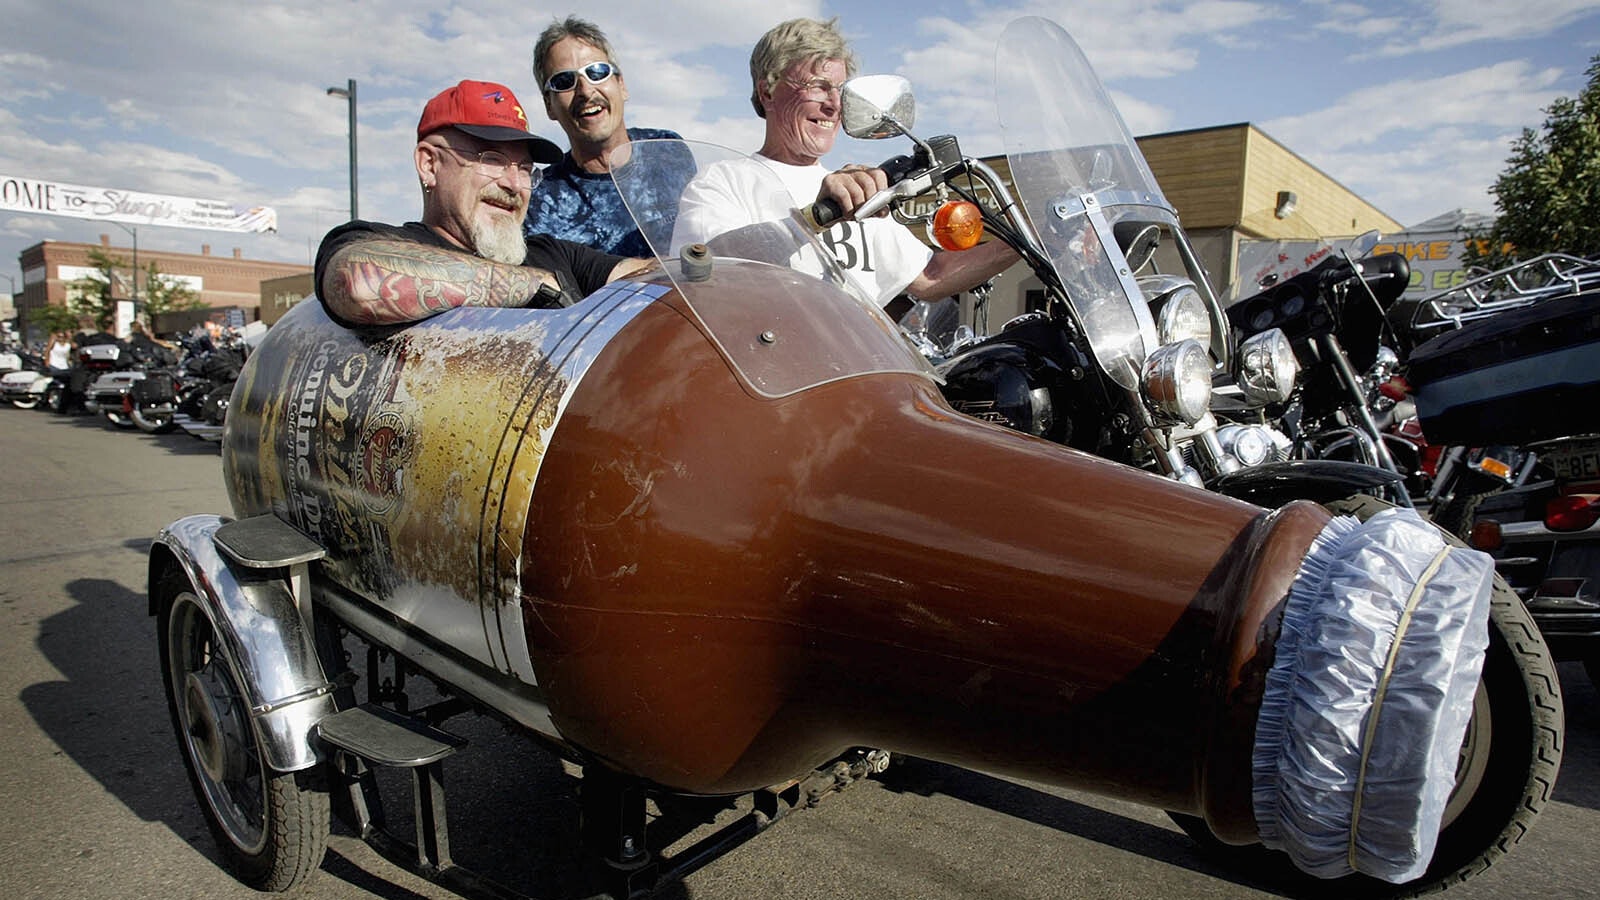 A biker rides his motorcycle with a sidecar shaped like a beer bottle through downtown Sturgis.